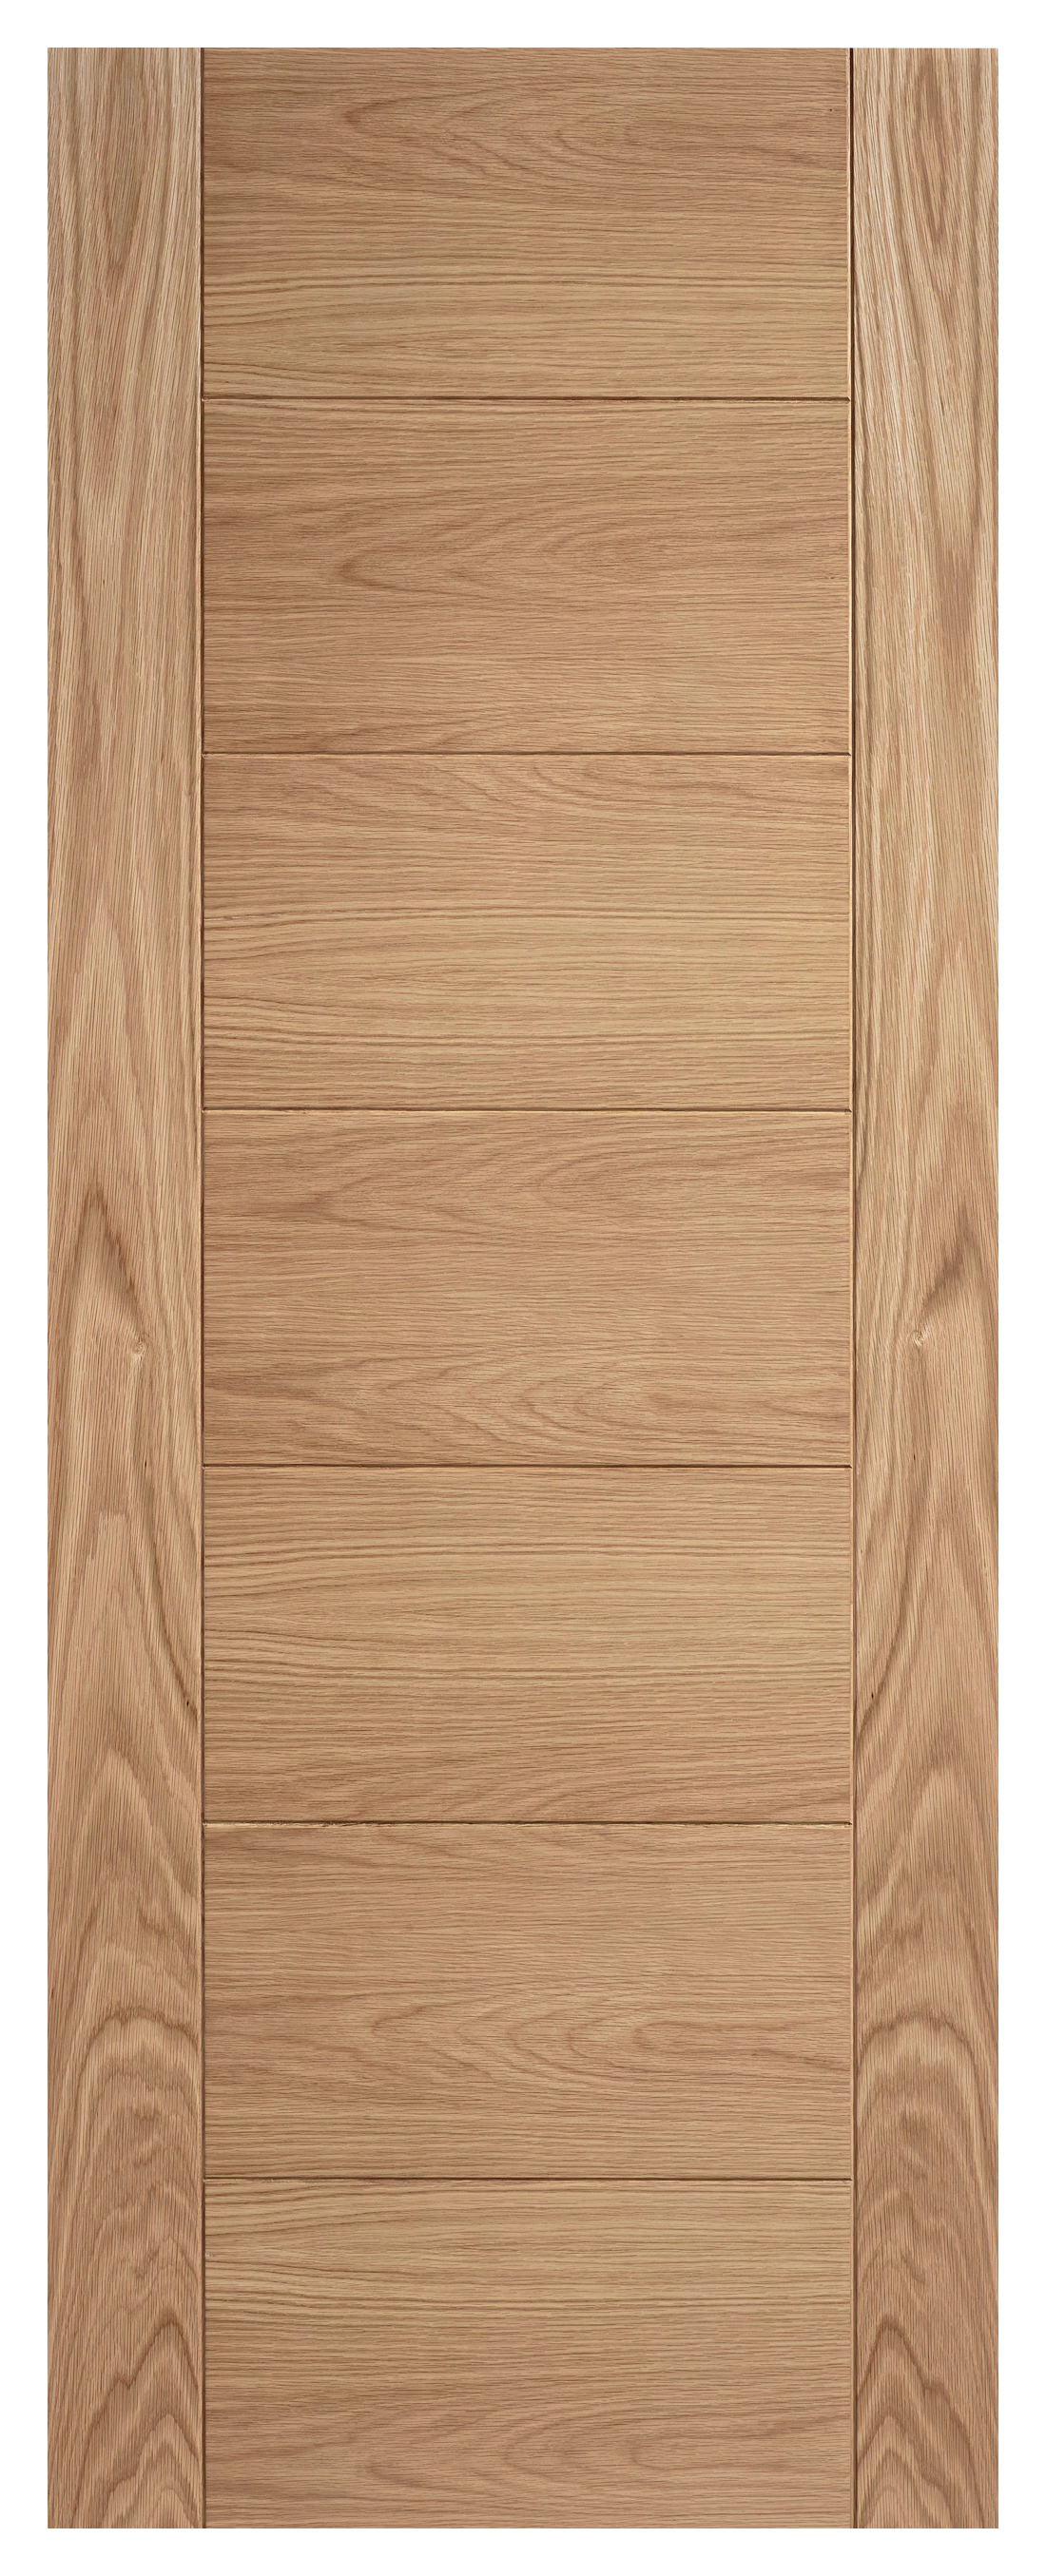 Image of LPD Internal Carini 7 Panel Pre-Finished Oak Solid Core Door - 838 x 1981mm